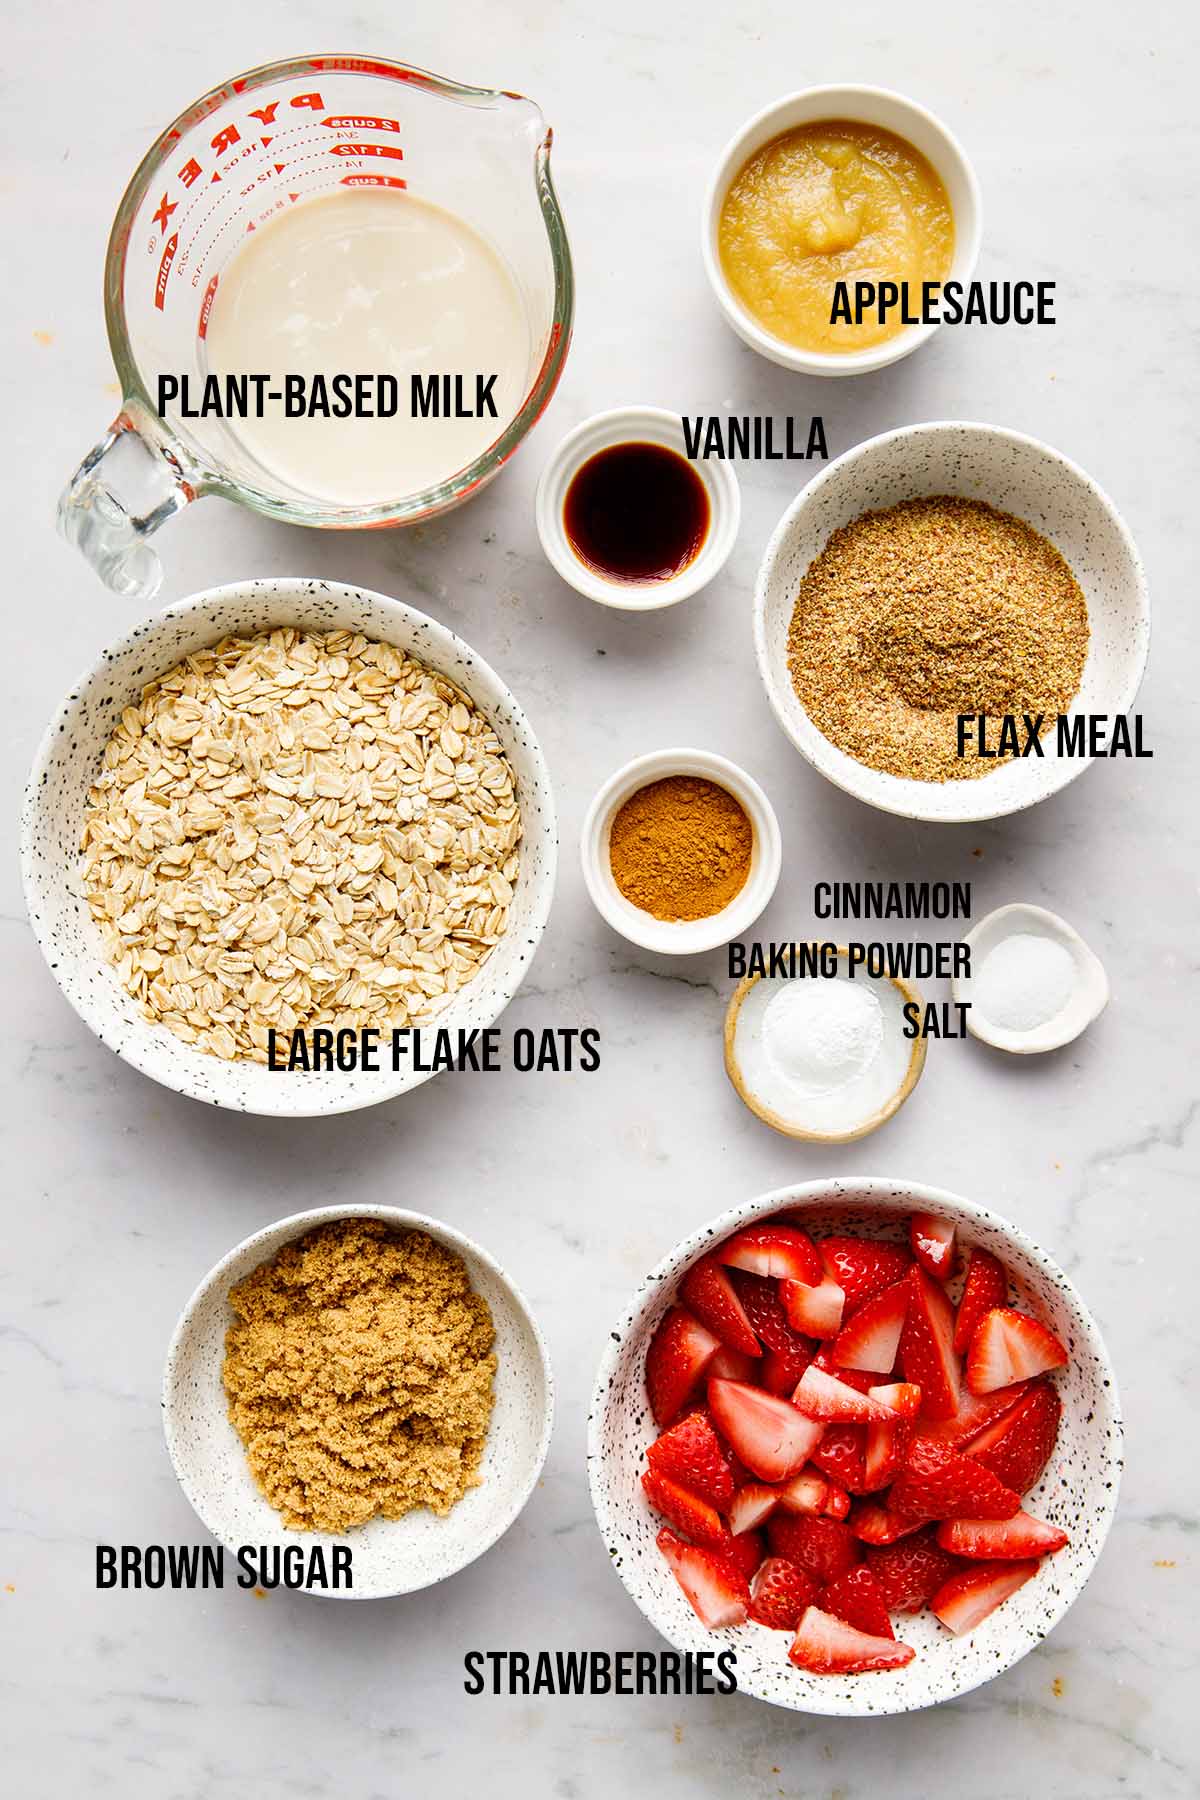 Ingredients to make strawberry baked oatmeal.